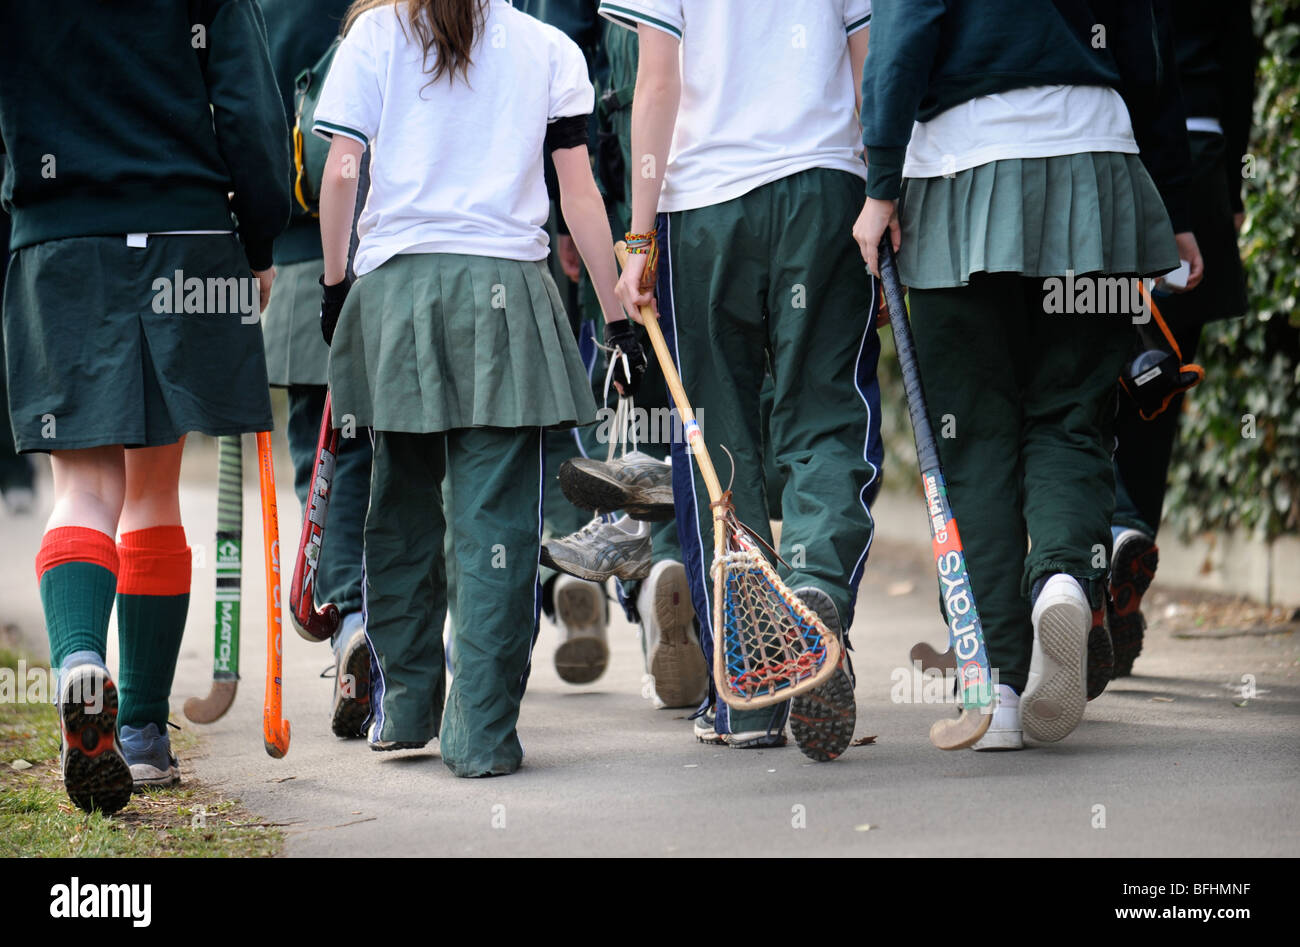 Girls from Cheltenham Ladies' College on their way to hockey and lacrosse practice Gloucestershire UK Stock Photo